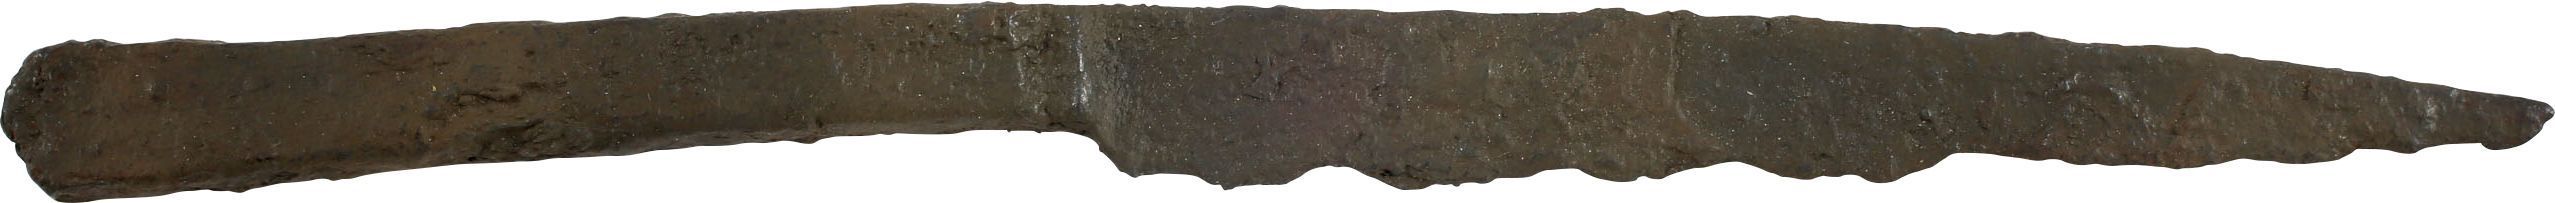 CRUSADER’S SIDE KNIFE 14th CENTURY - WAS $550.00, NOW $275.00 - Fagan Arms